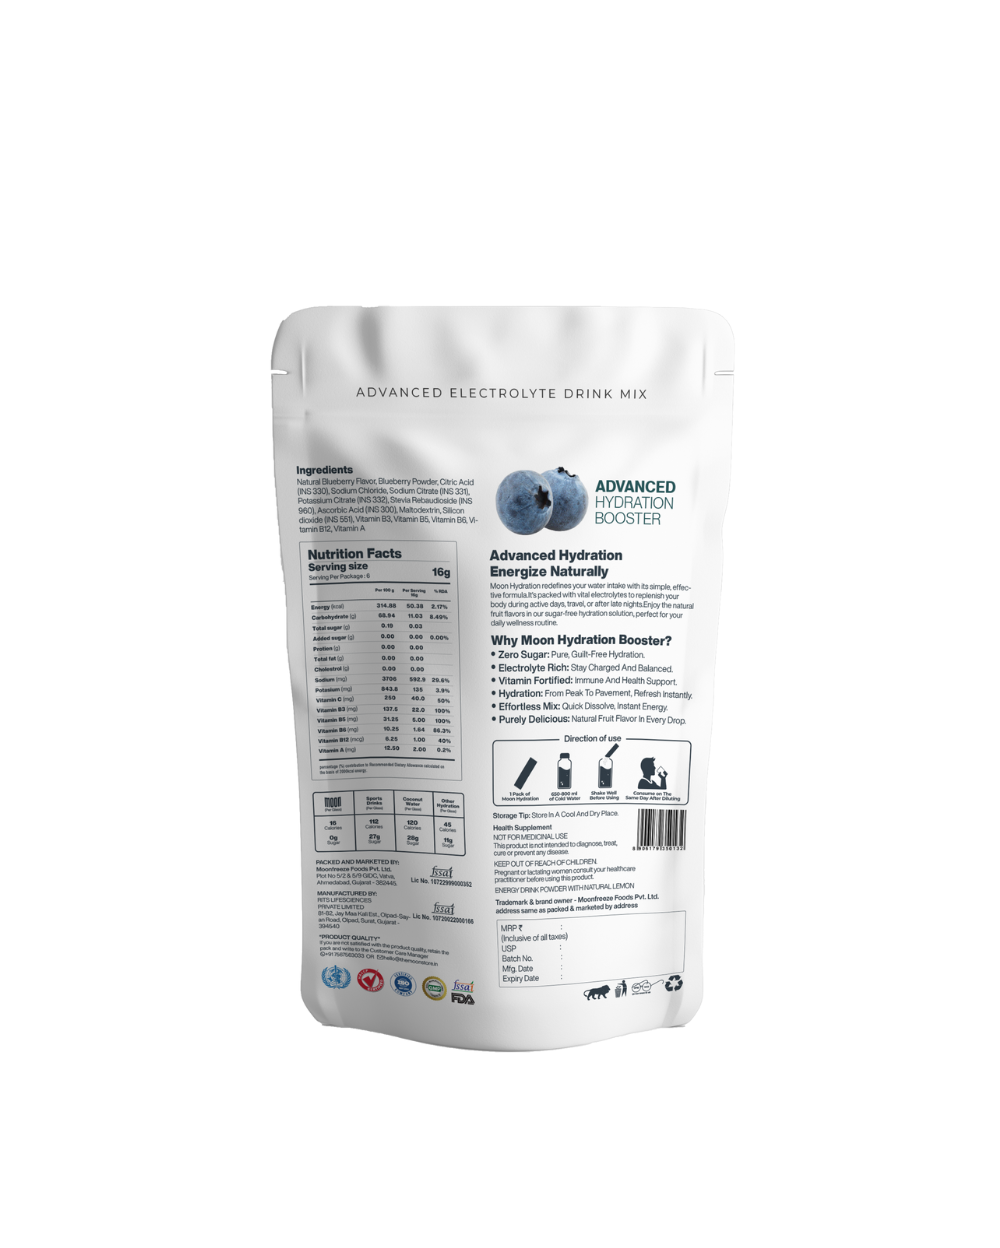 Product description: A packet of Moon Blueberry Lunar Hydration Booster on a white background.